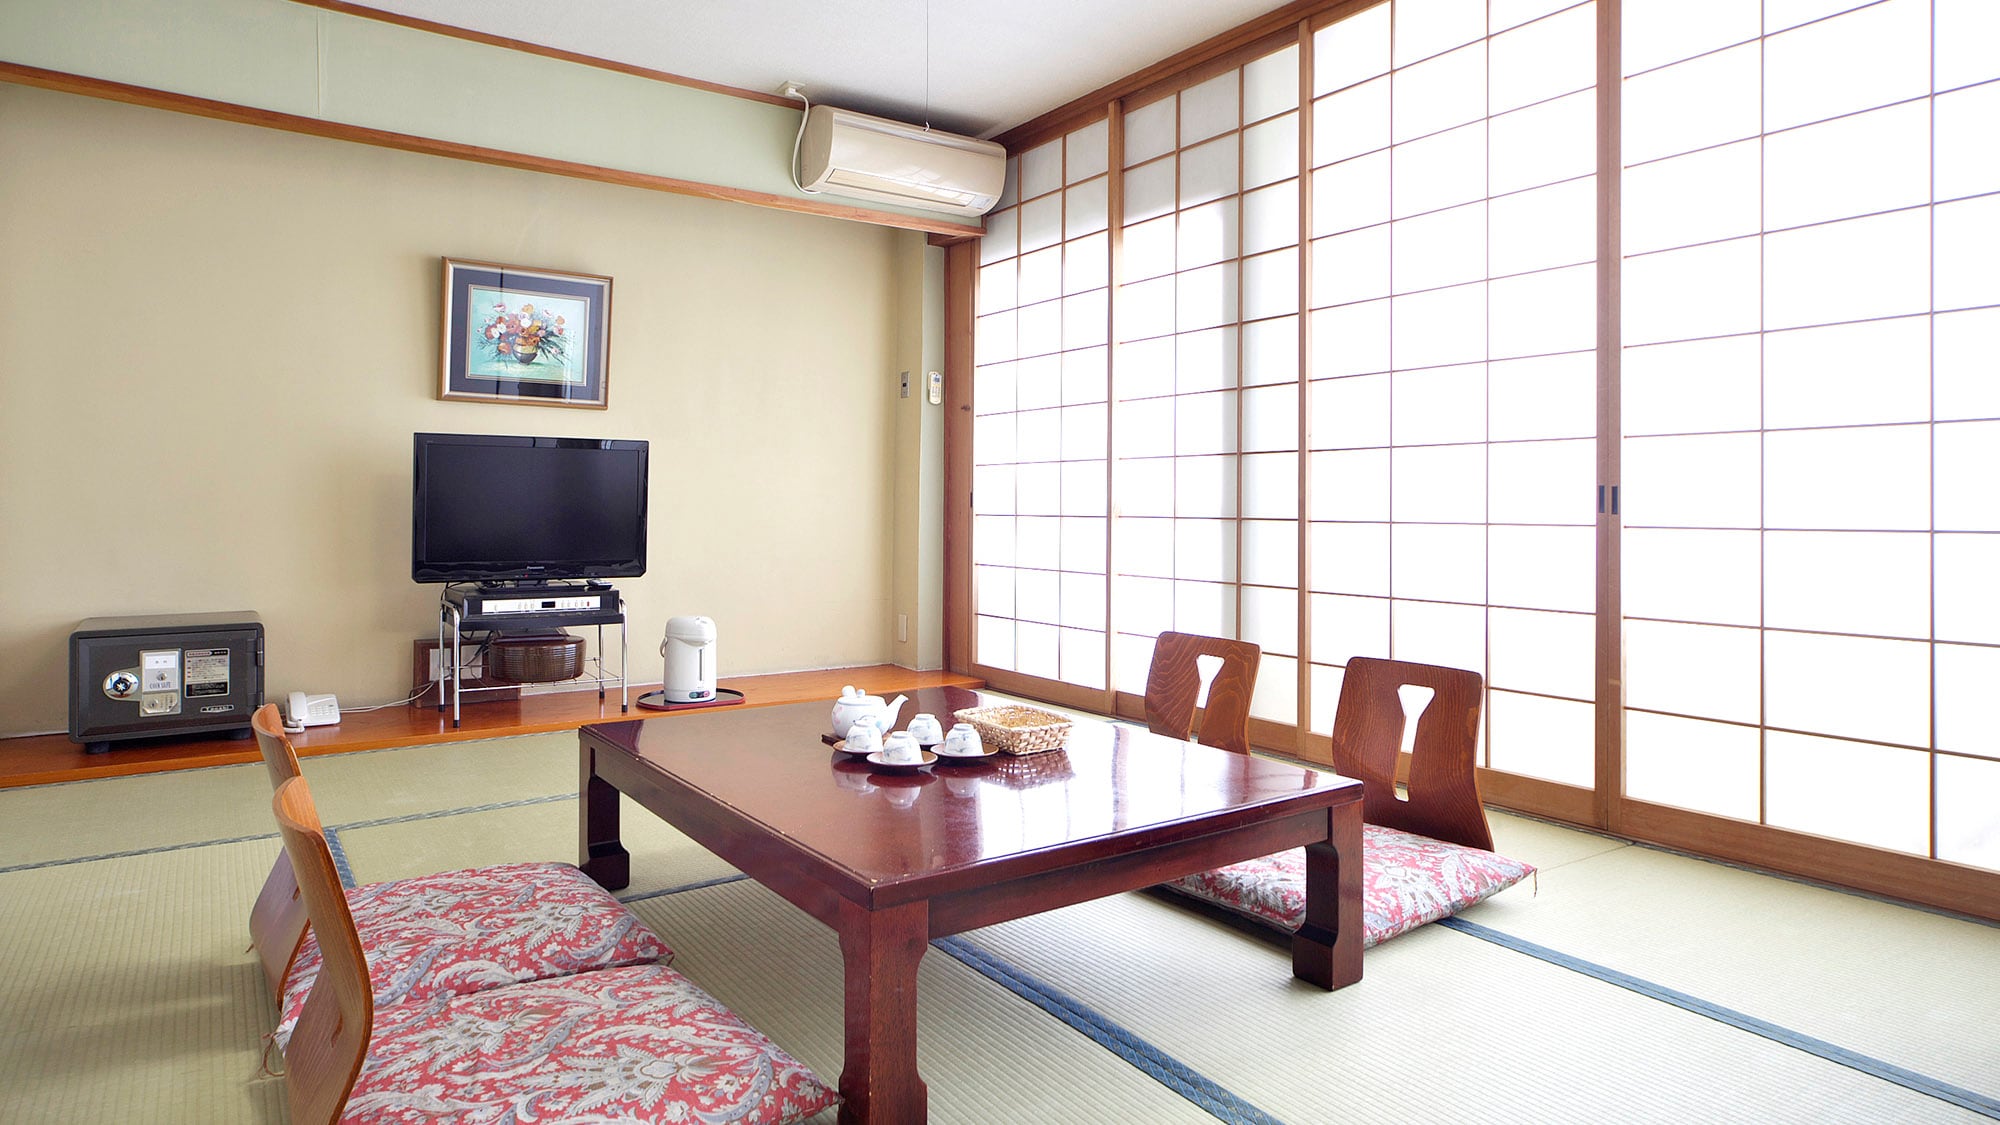 ・ [Example of guest room] Please relax and heal the tiredness of your trip in a Japanese-style room.